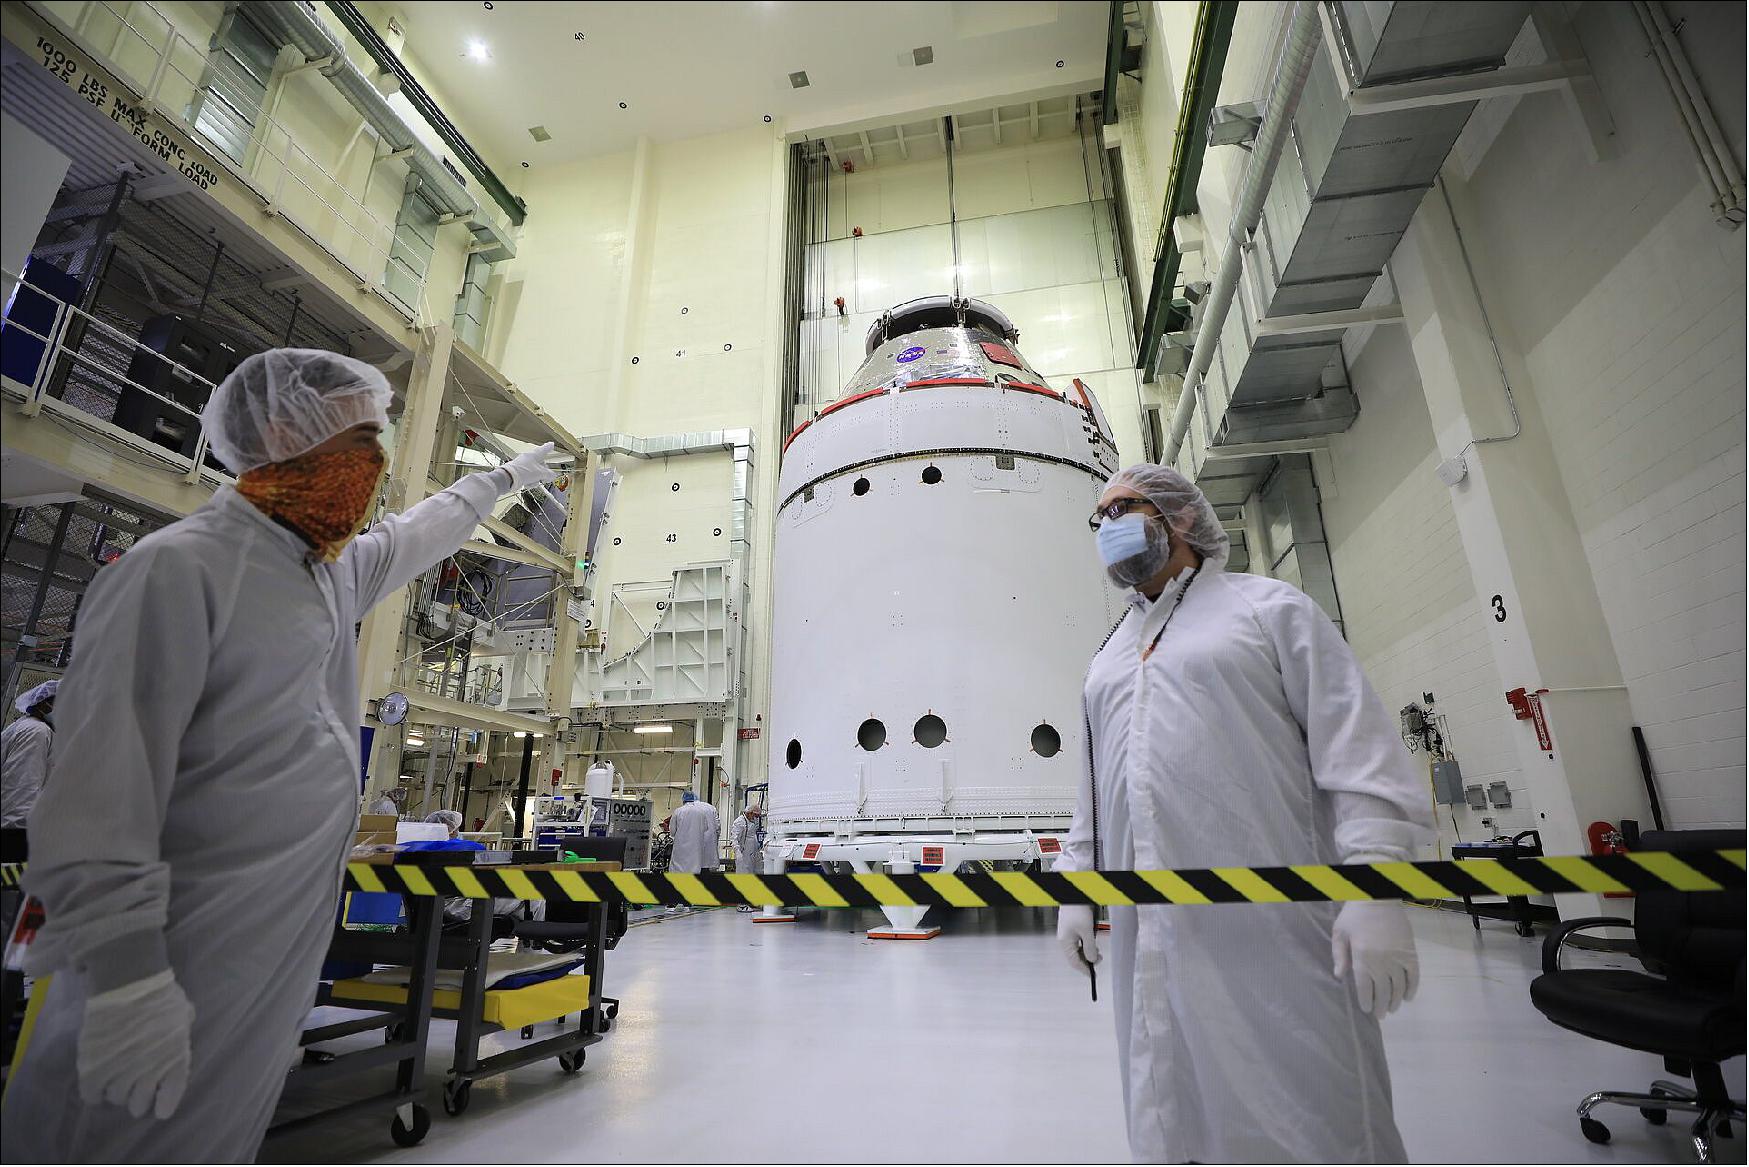 Figure 35: Like most spacecraft Orion will be launched inside protective fairings on top of its Space Launch System rocket. The spacecraft adapter jettison fairings have now been installed that protect the European Service Module during launch and are ejected shortly after liftoff (image credit: NASA)